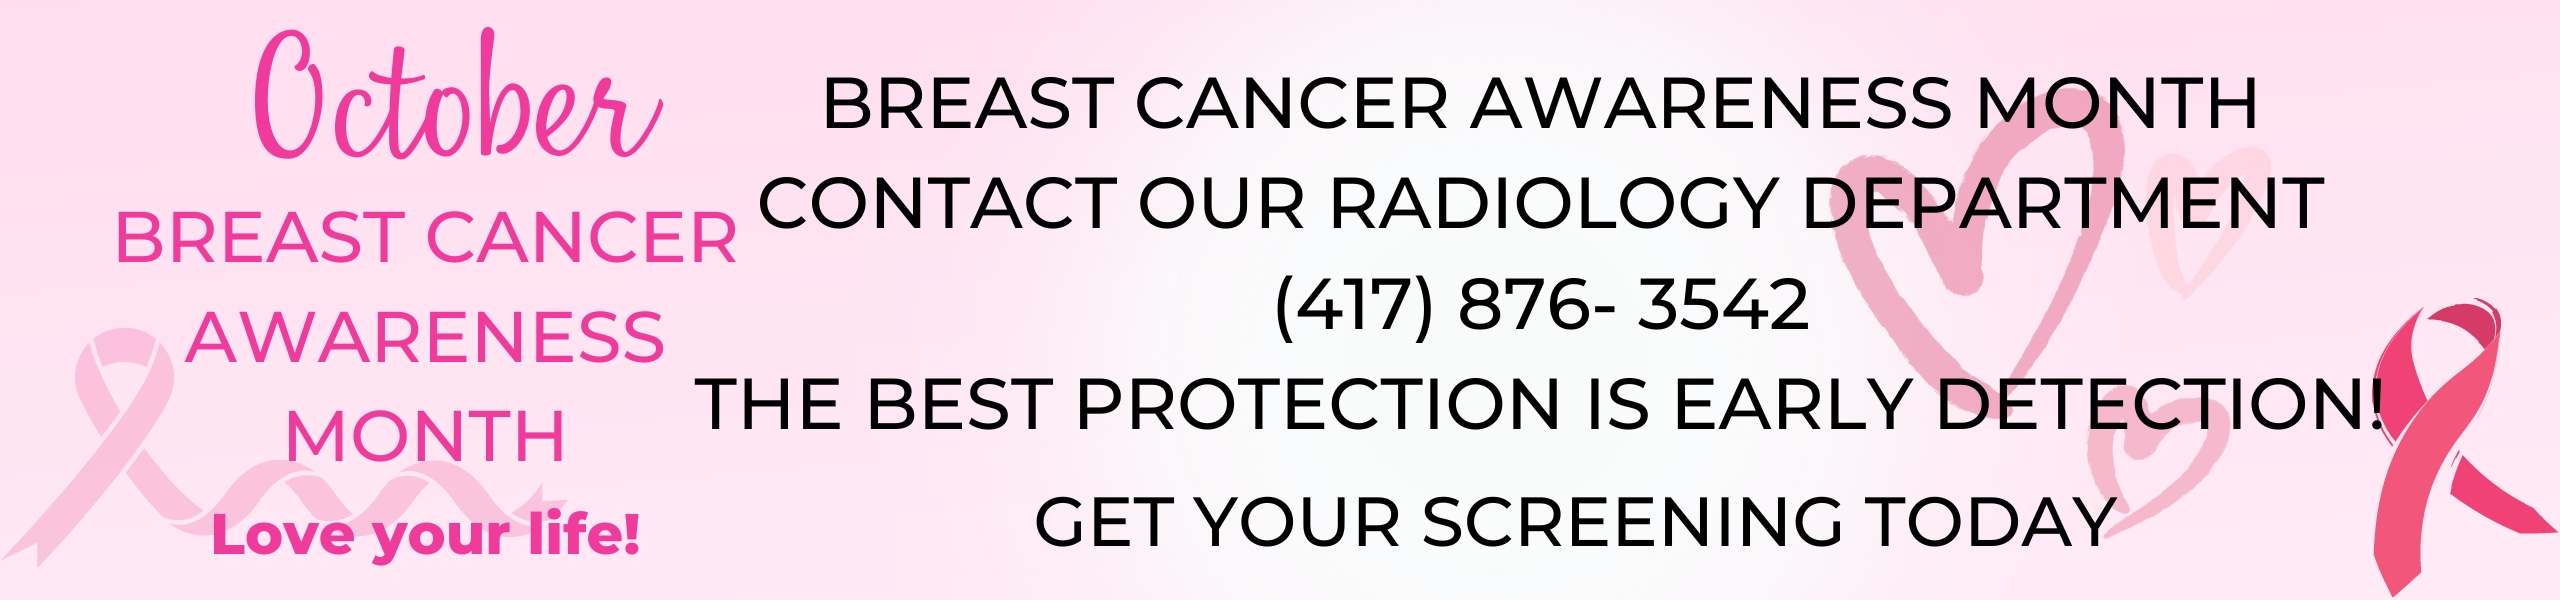 breast cancer, the best protection is early detection. the flyer is pink